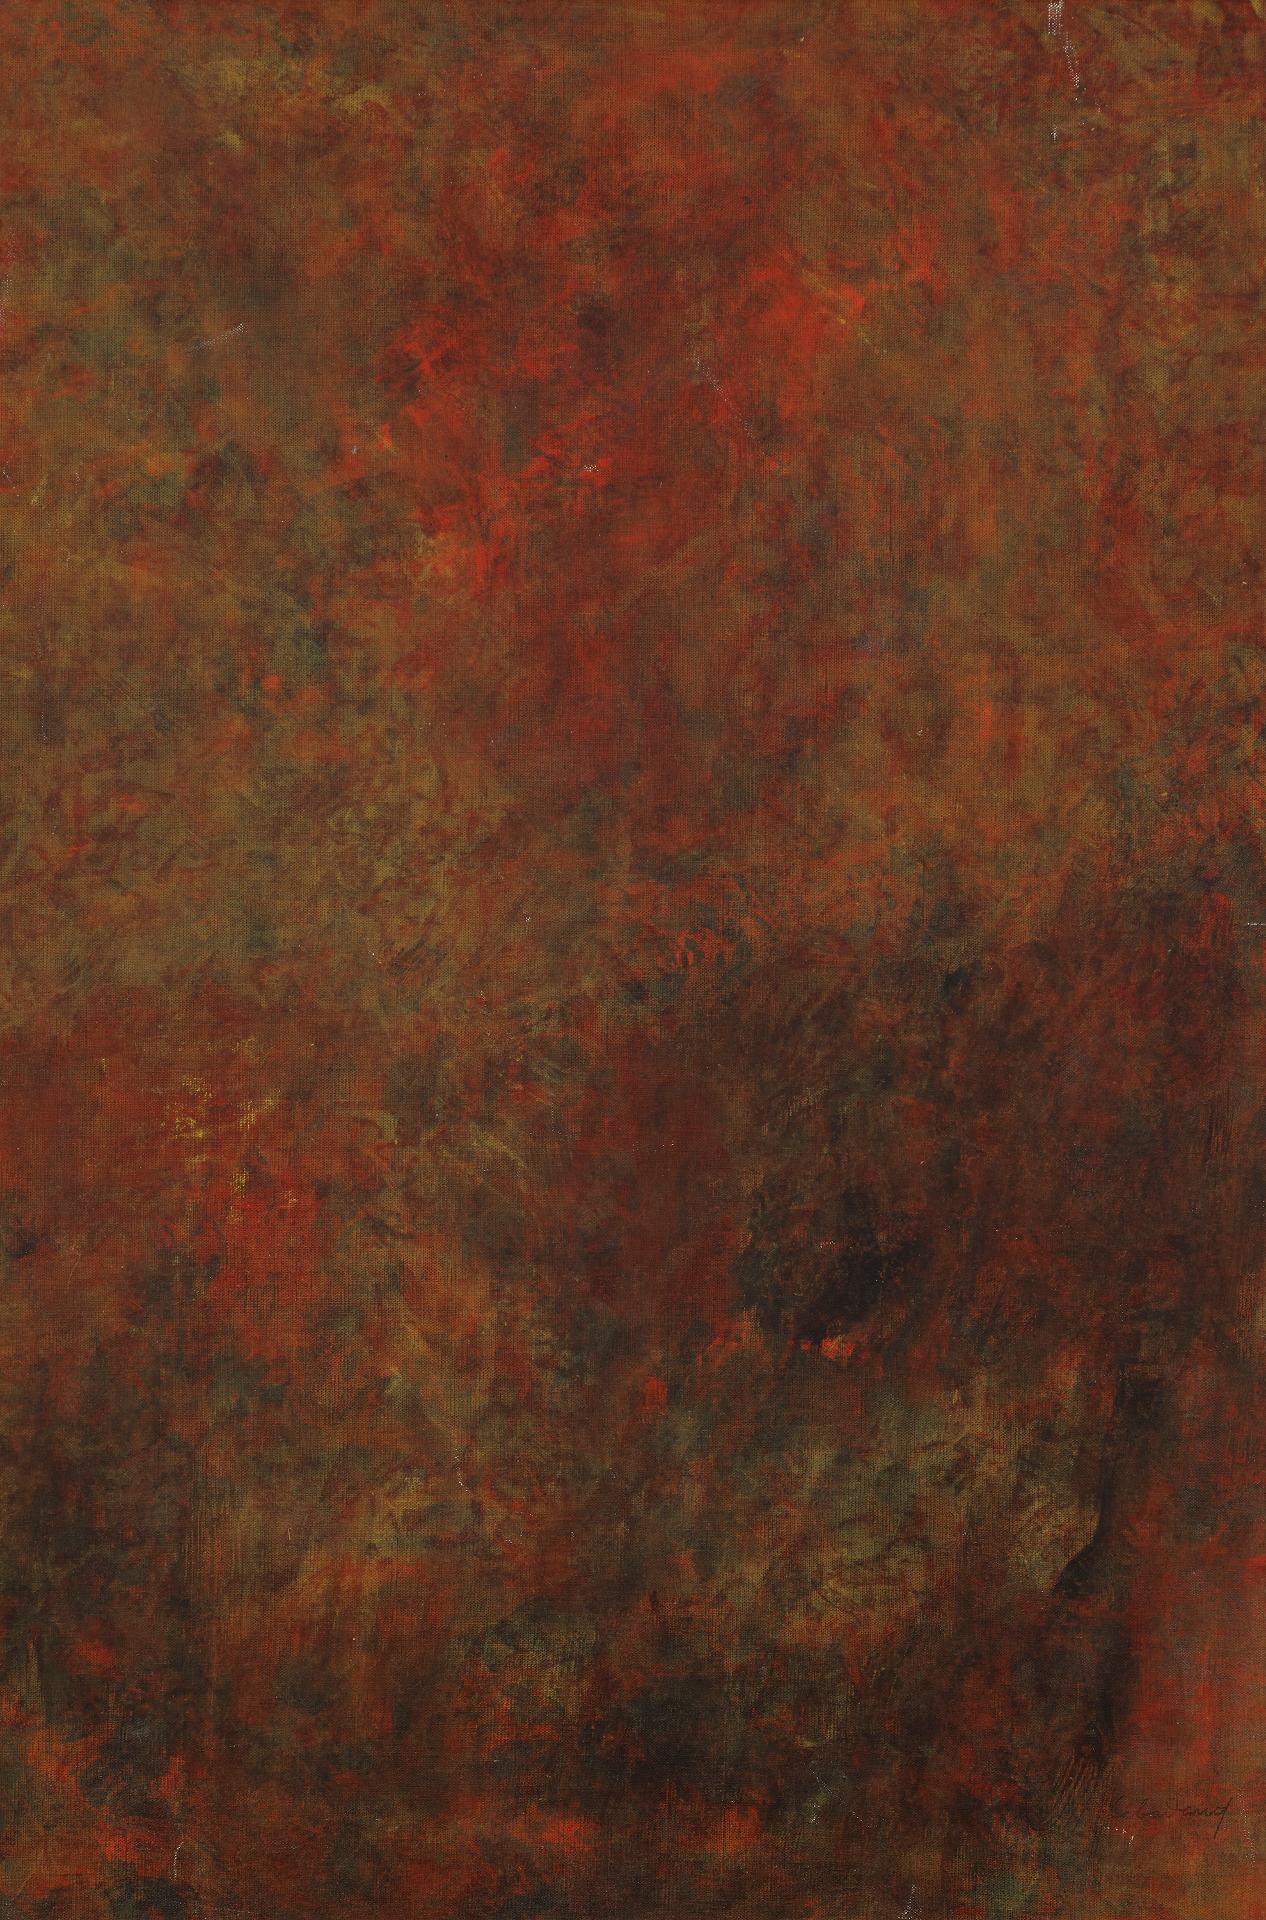 Lebedang - Untitled Abstract in Red, n.d.